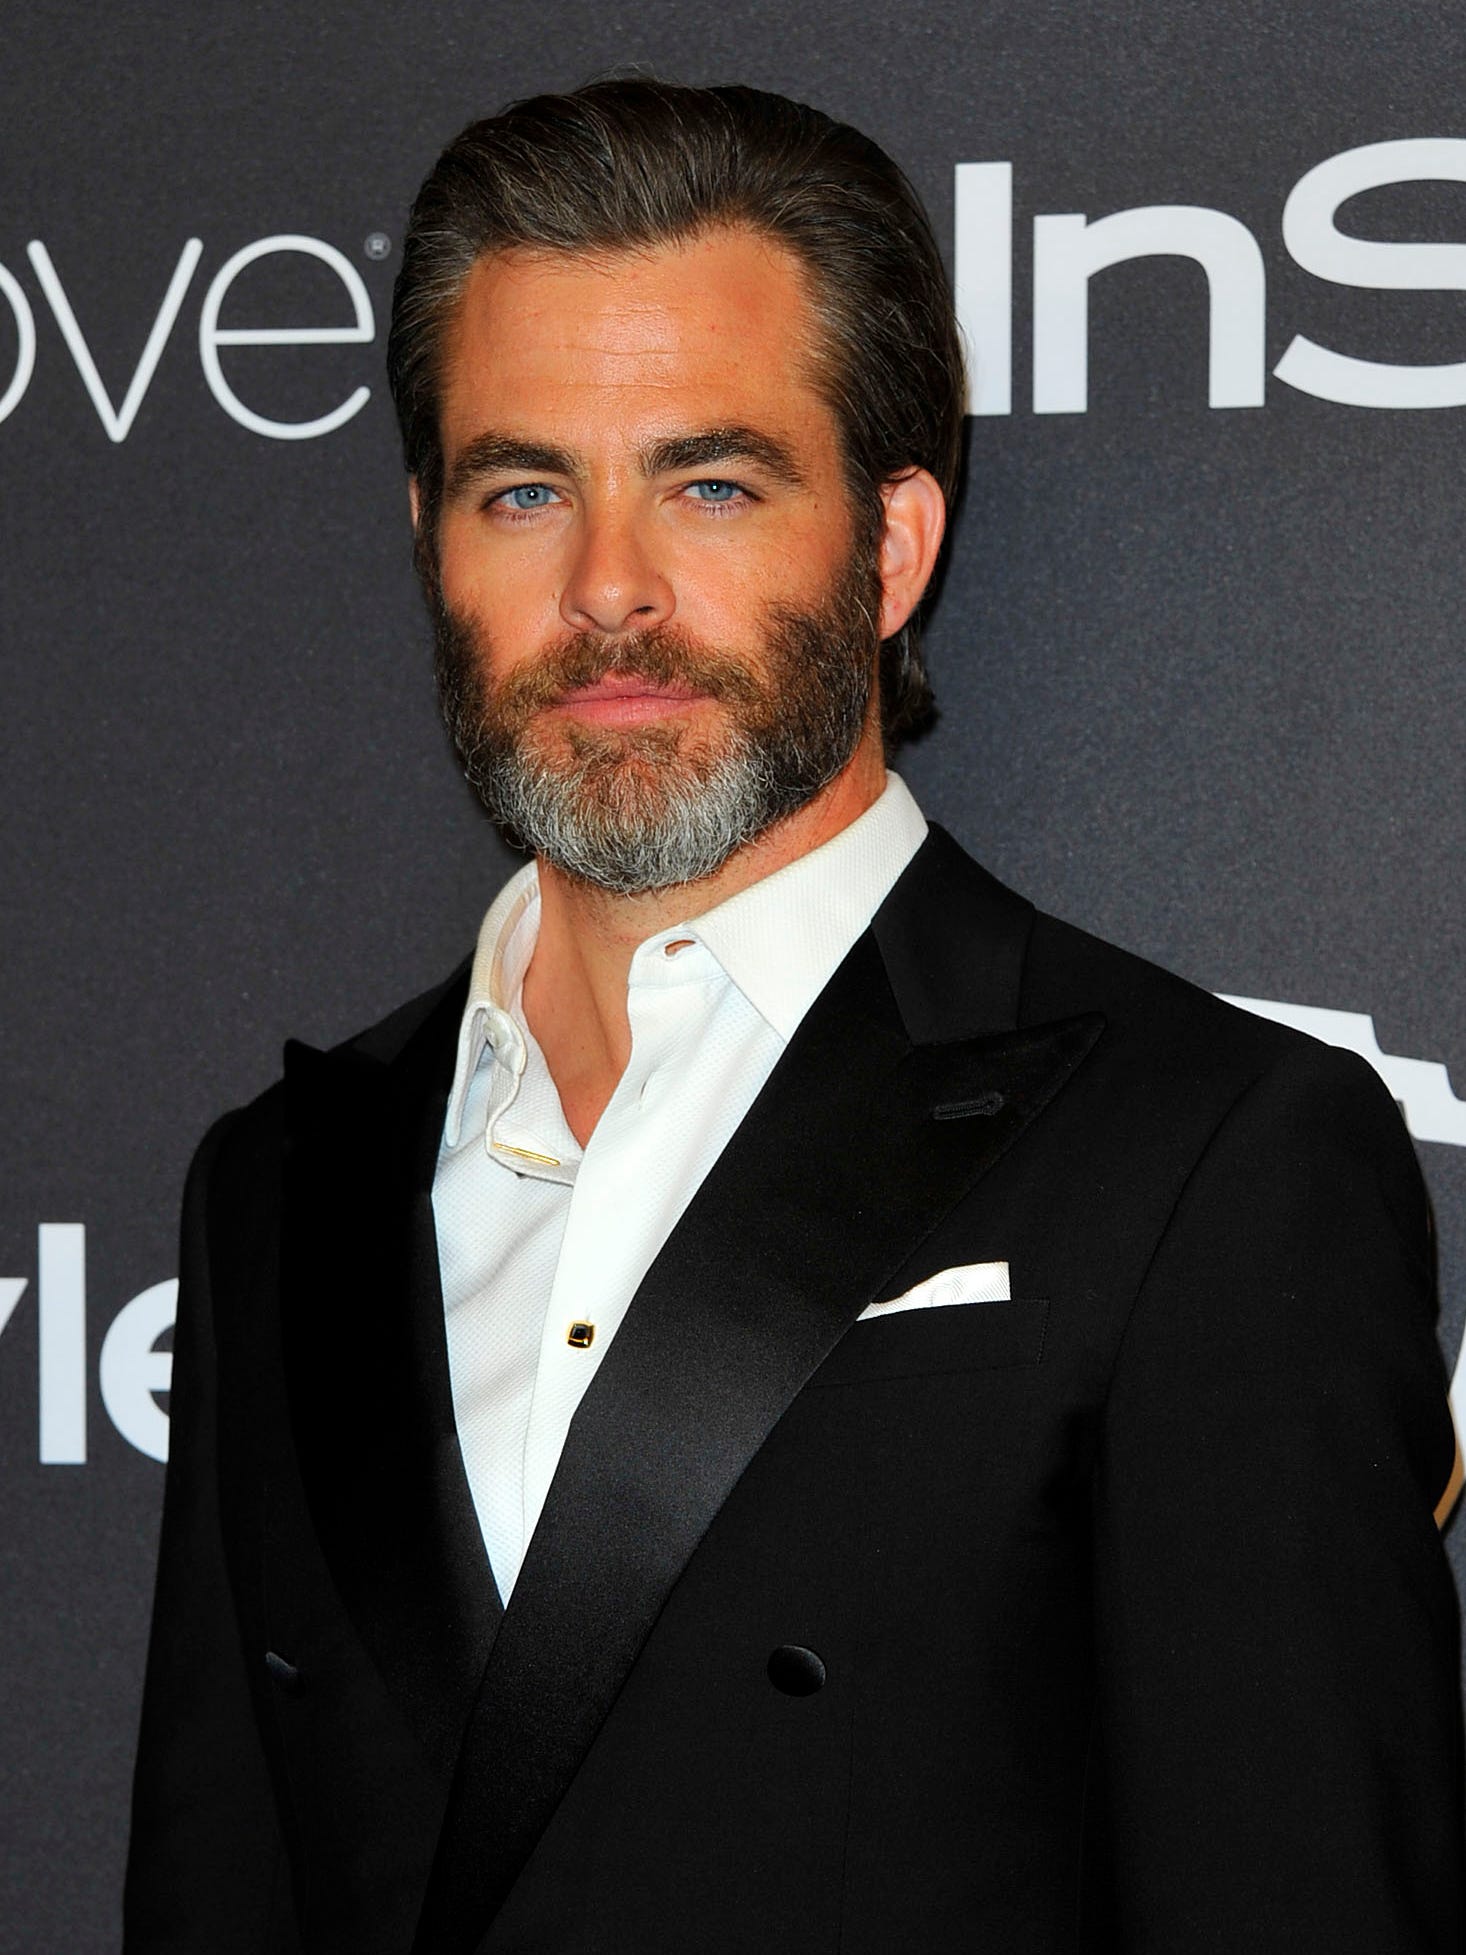 Bald Chris Pine explains why he cut off his hair with clippers